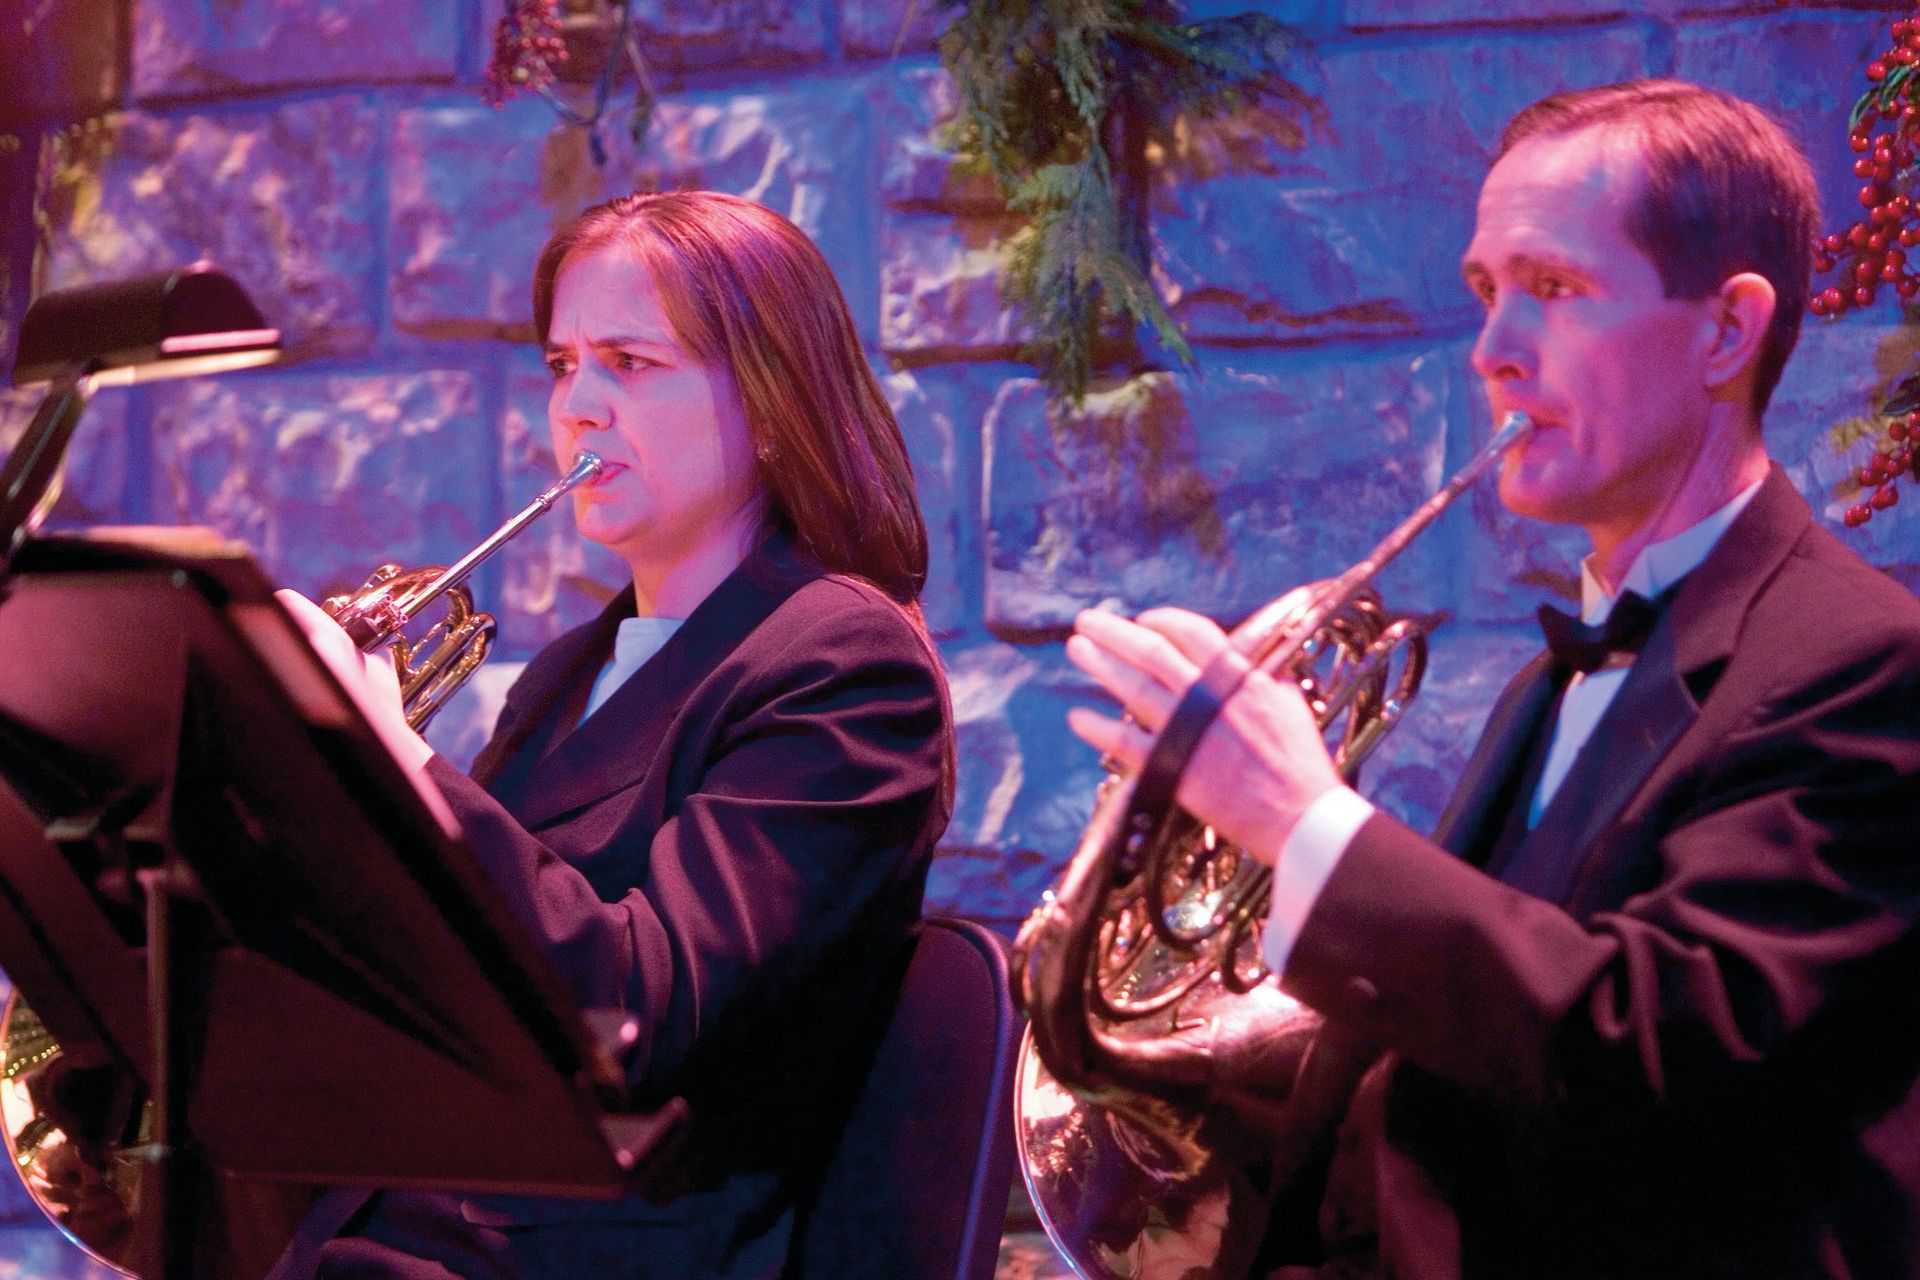 Two members of the Orchestra at Temple Square play French horns during a Christmas concert.